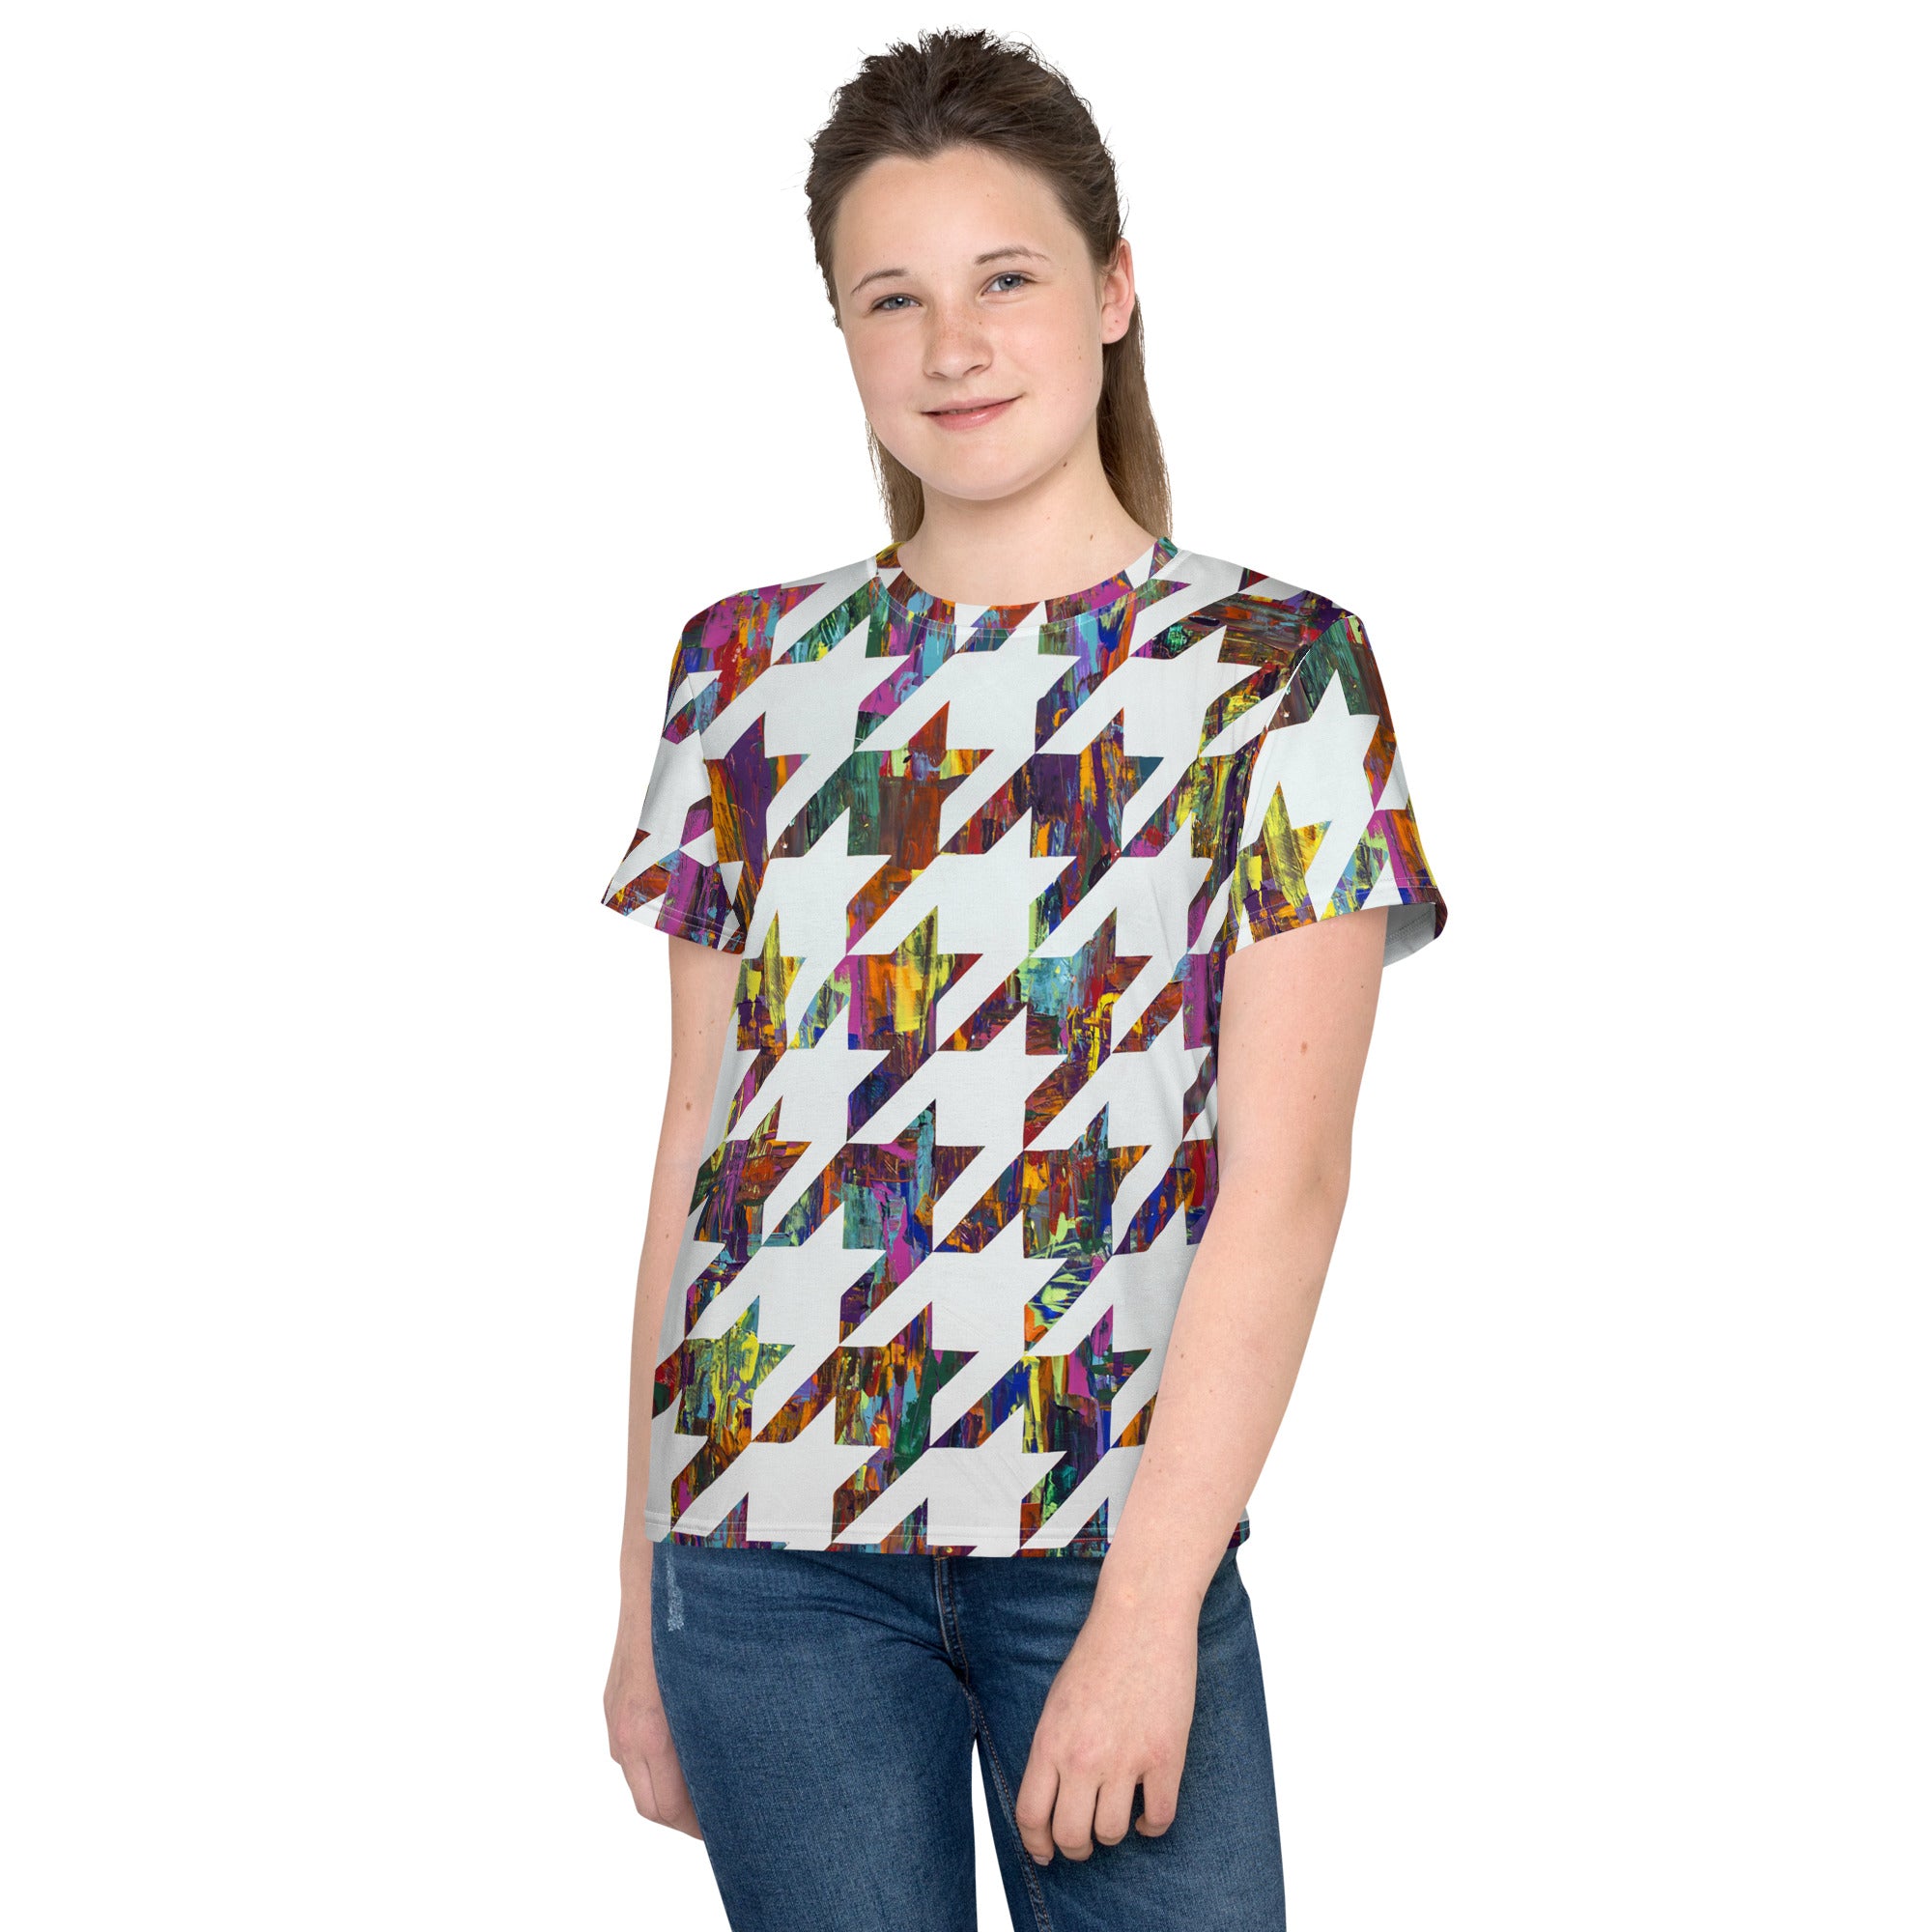 Which Came First, Galaga or Houndstooth Youth crew neck t-shirt